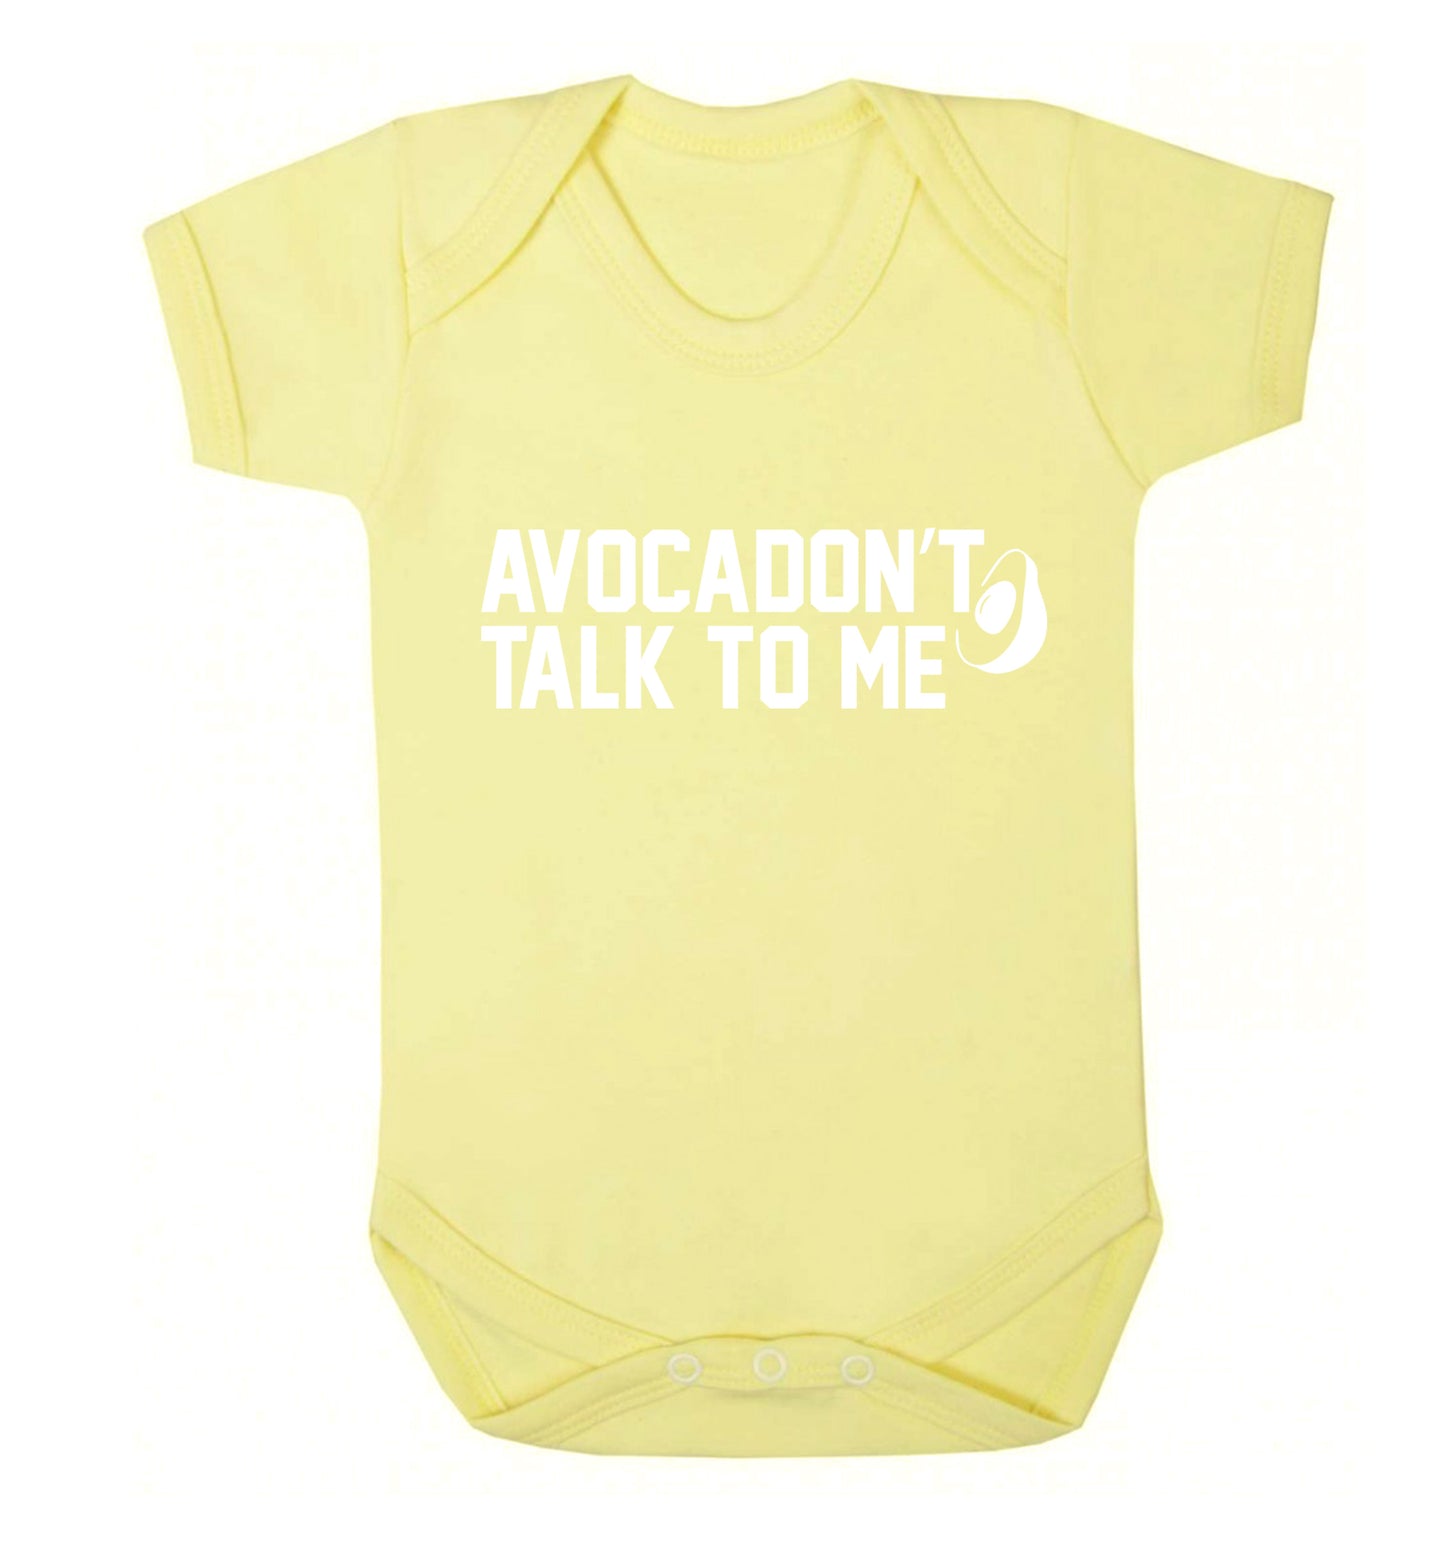 Avocadon't talk to me Baby Vest pale yellow 18-24 months